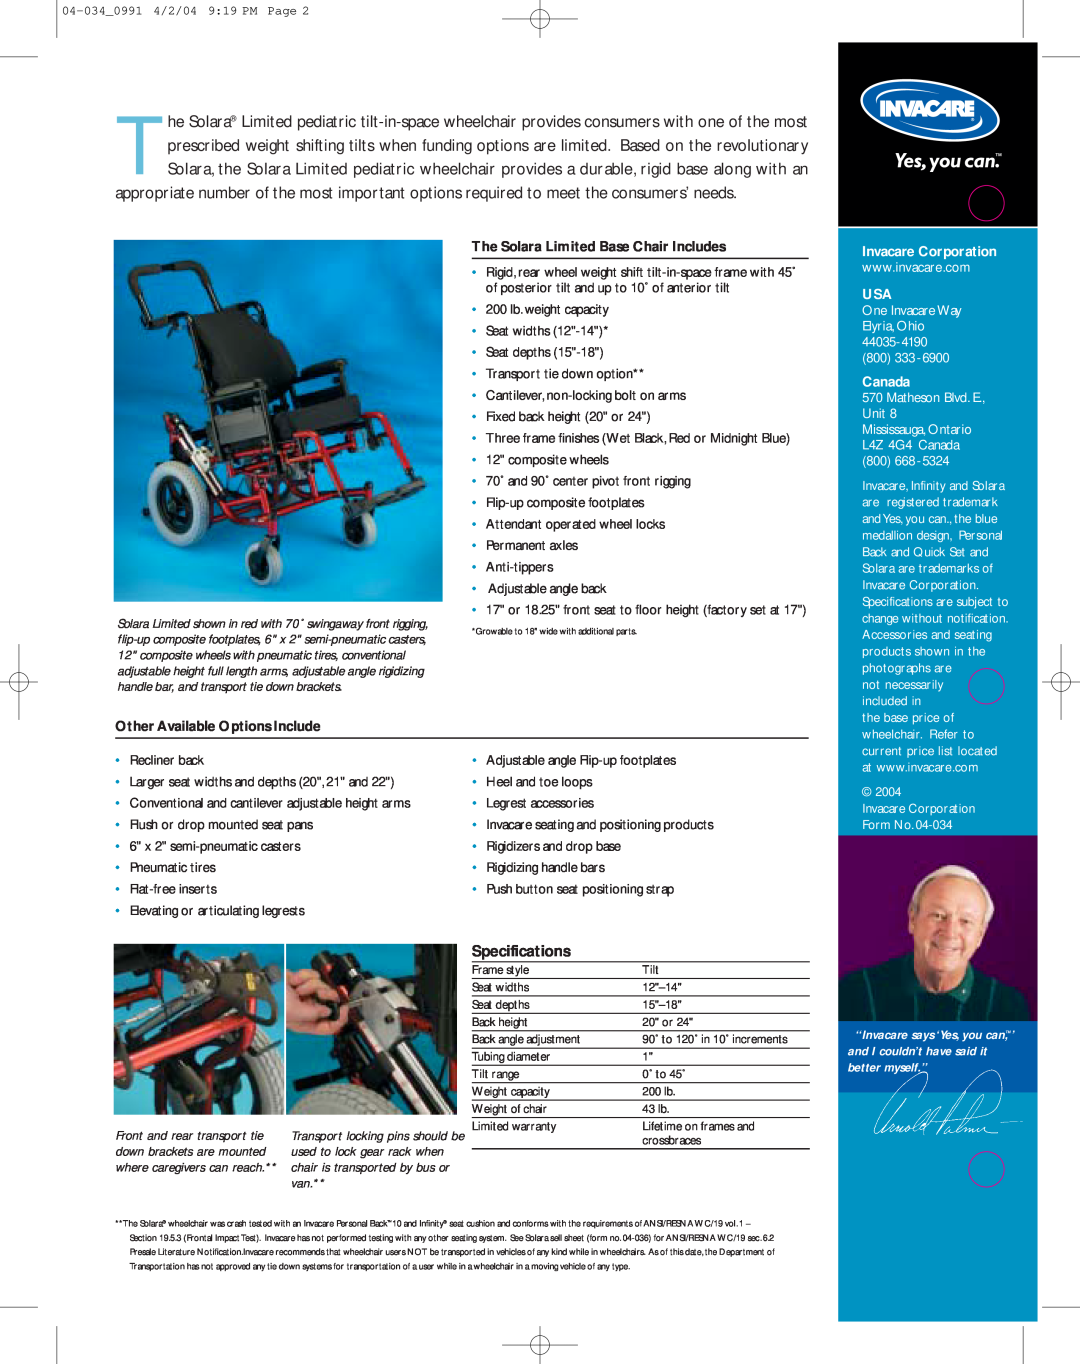 Invacare Tilt-in-Space Wheelchair Specifications, The Solara Limited Base Chair Includes, Invacare Corporation, Canada 